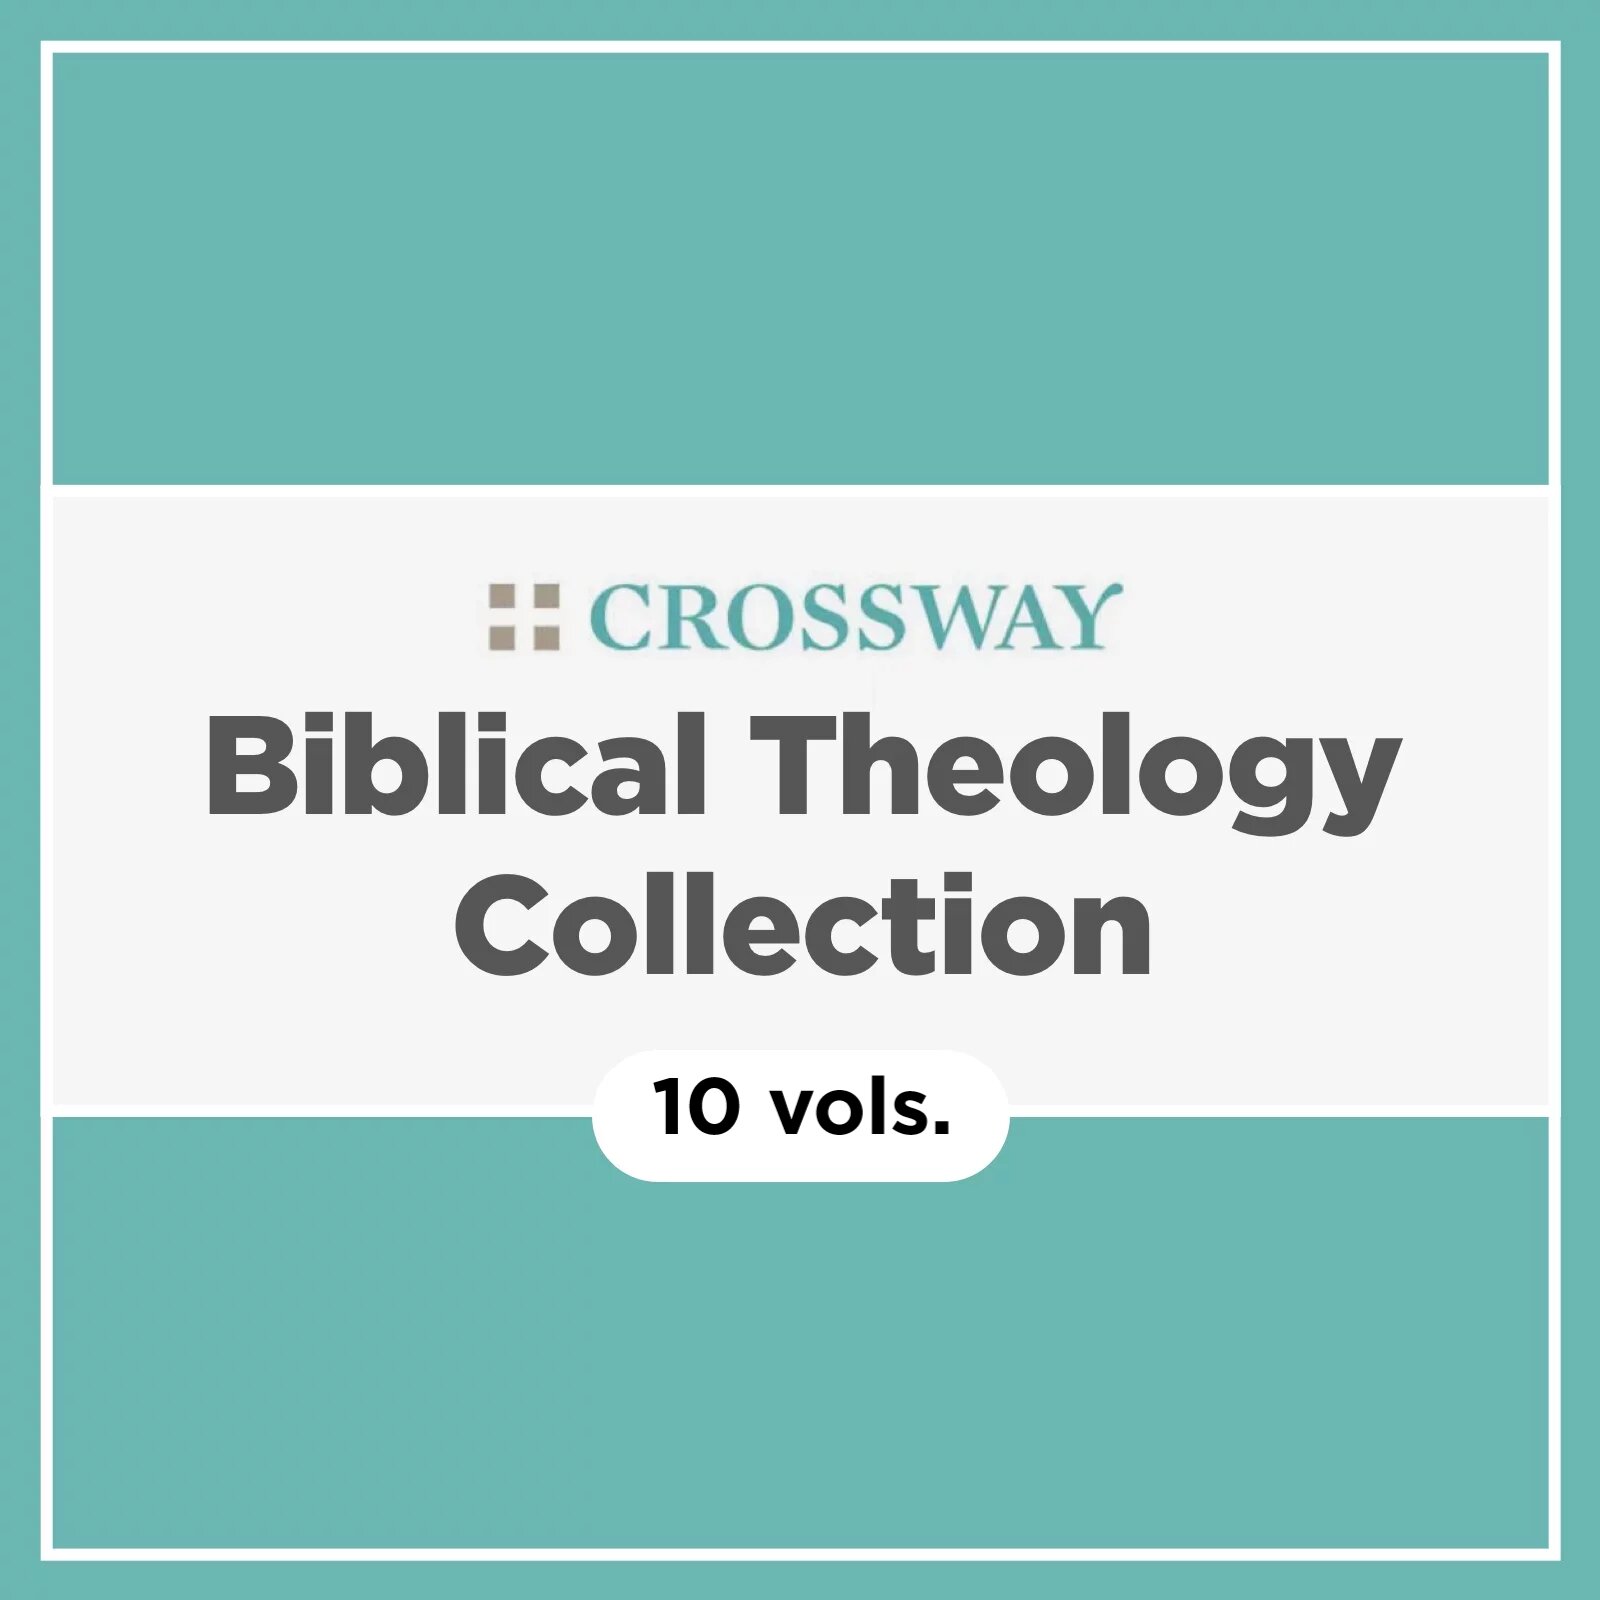 Crossway Biblical Theology Collection (10 vols.)